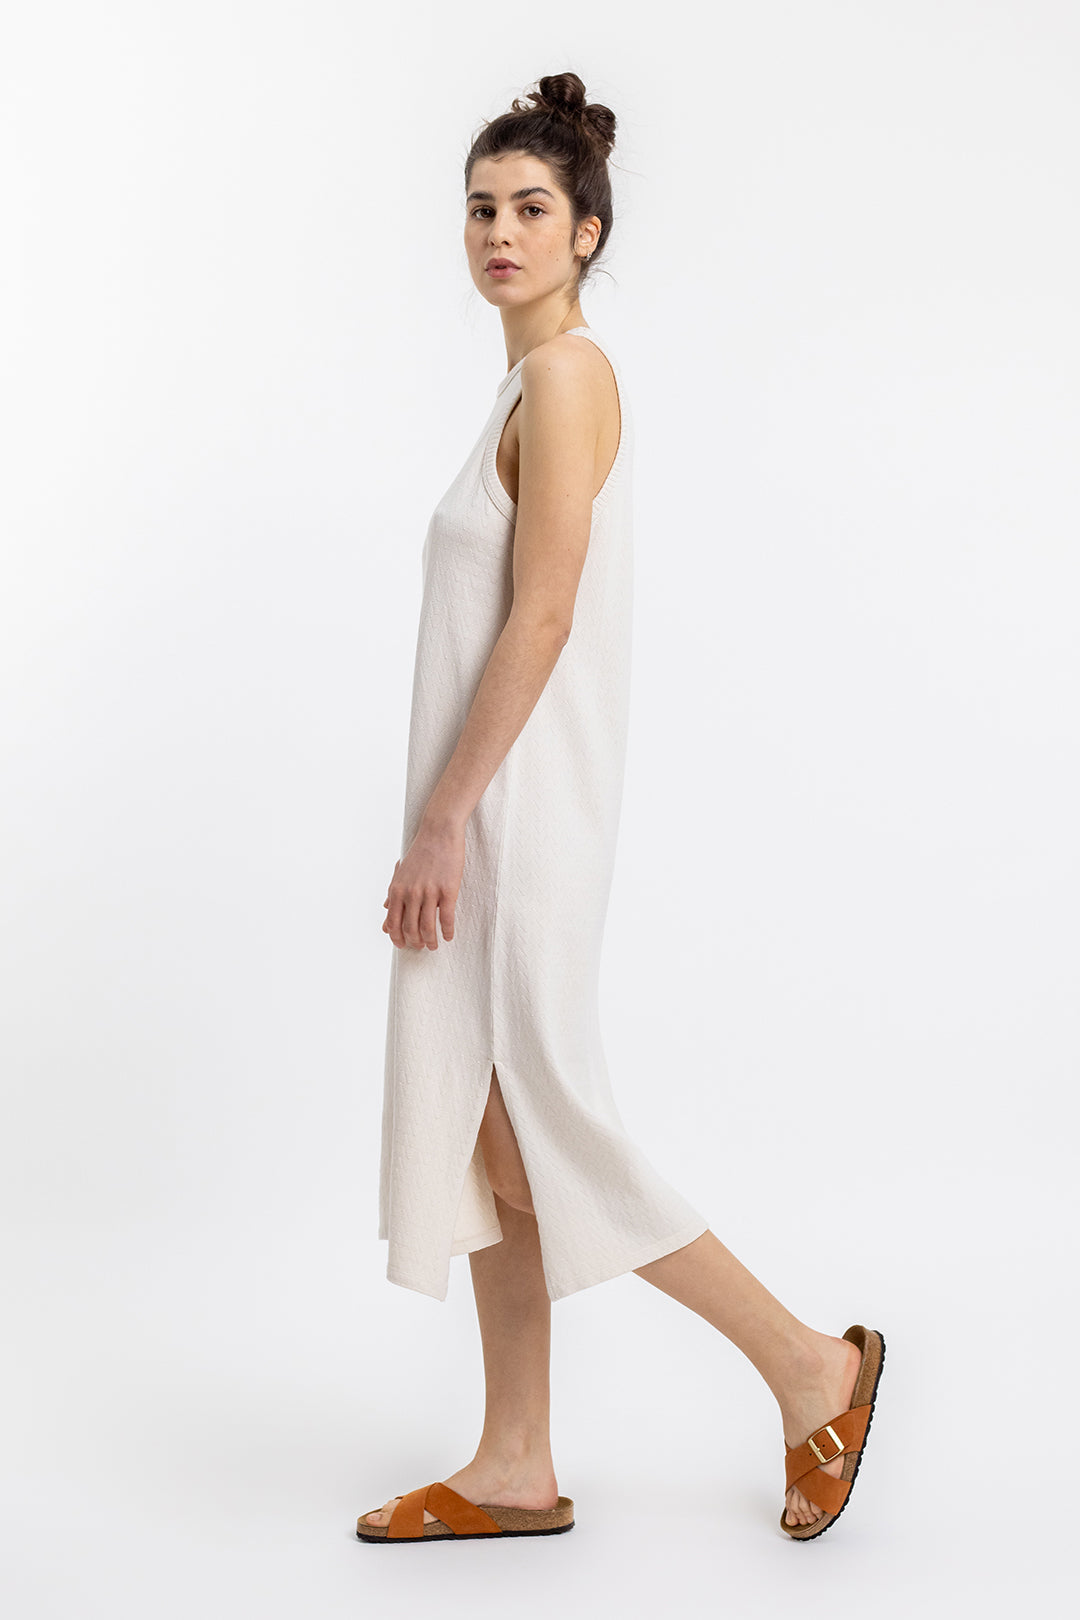 Beige, sleeveless dress made from 100% organic cotton from Rotholz